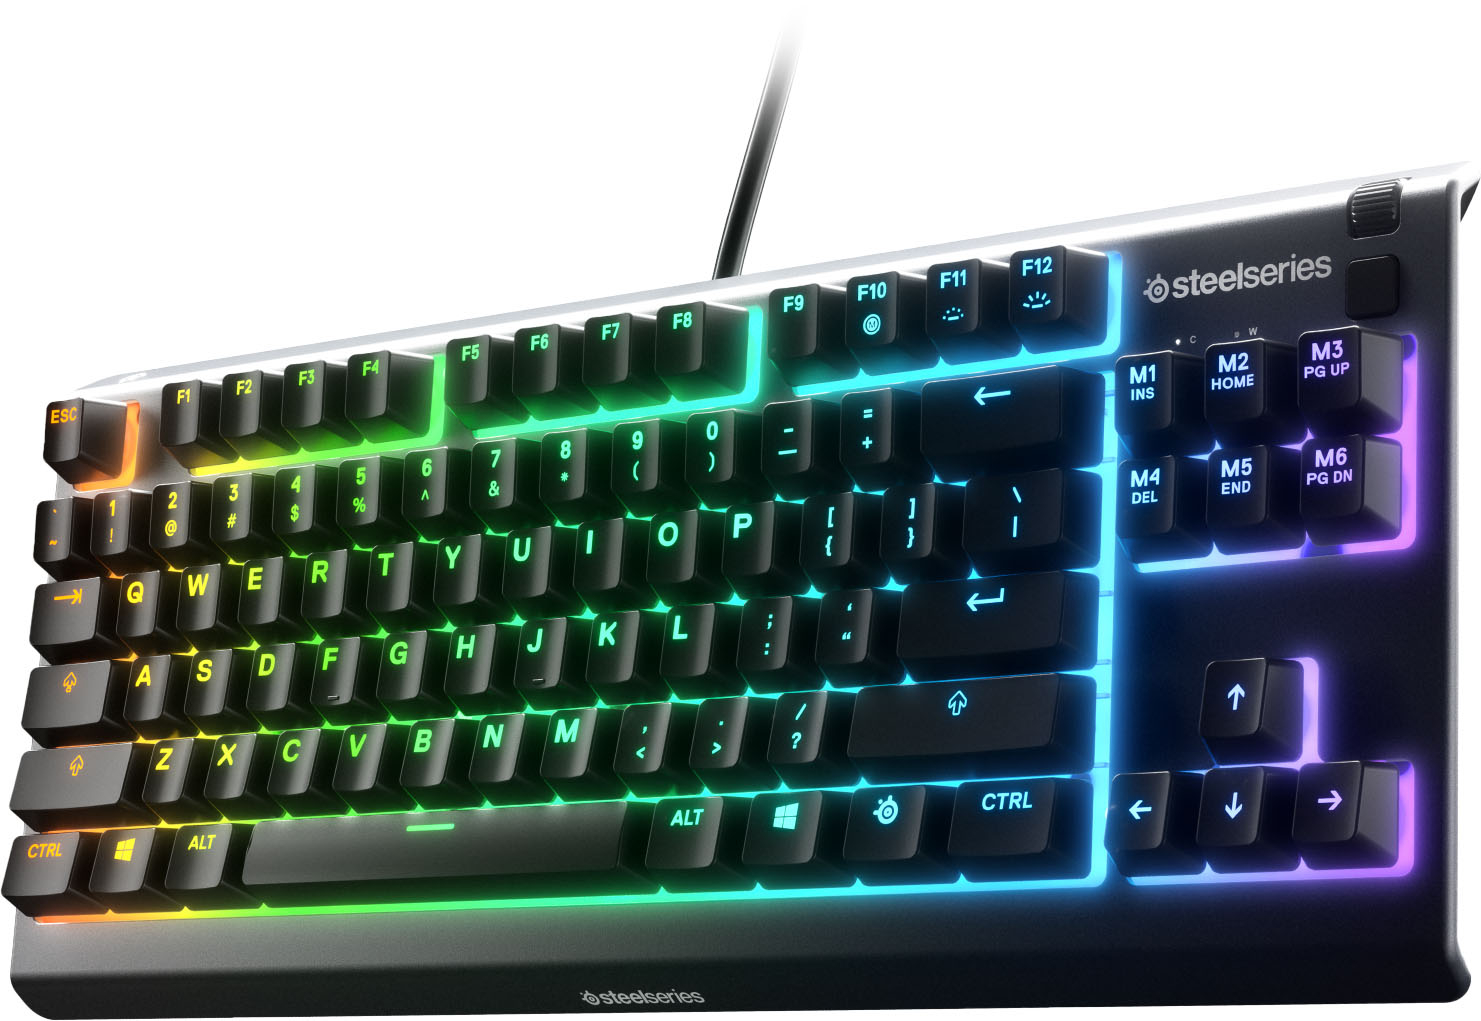 Gaming Grade Anti-Ghosting 8-Zone RGB Illumination SteelSeries Apex 3 TKL RGB Gaming Keyboard IP32 Water & Dust Resistant Whisper Quiet Gaming Switch Tenkeyless Compact Form Factor 